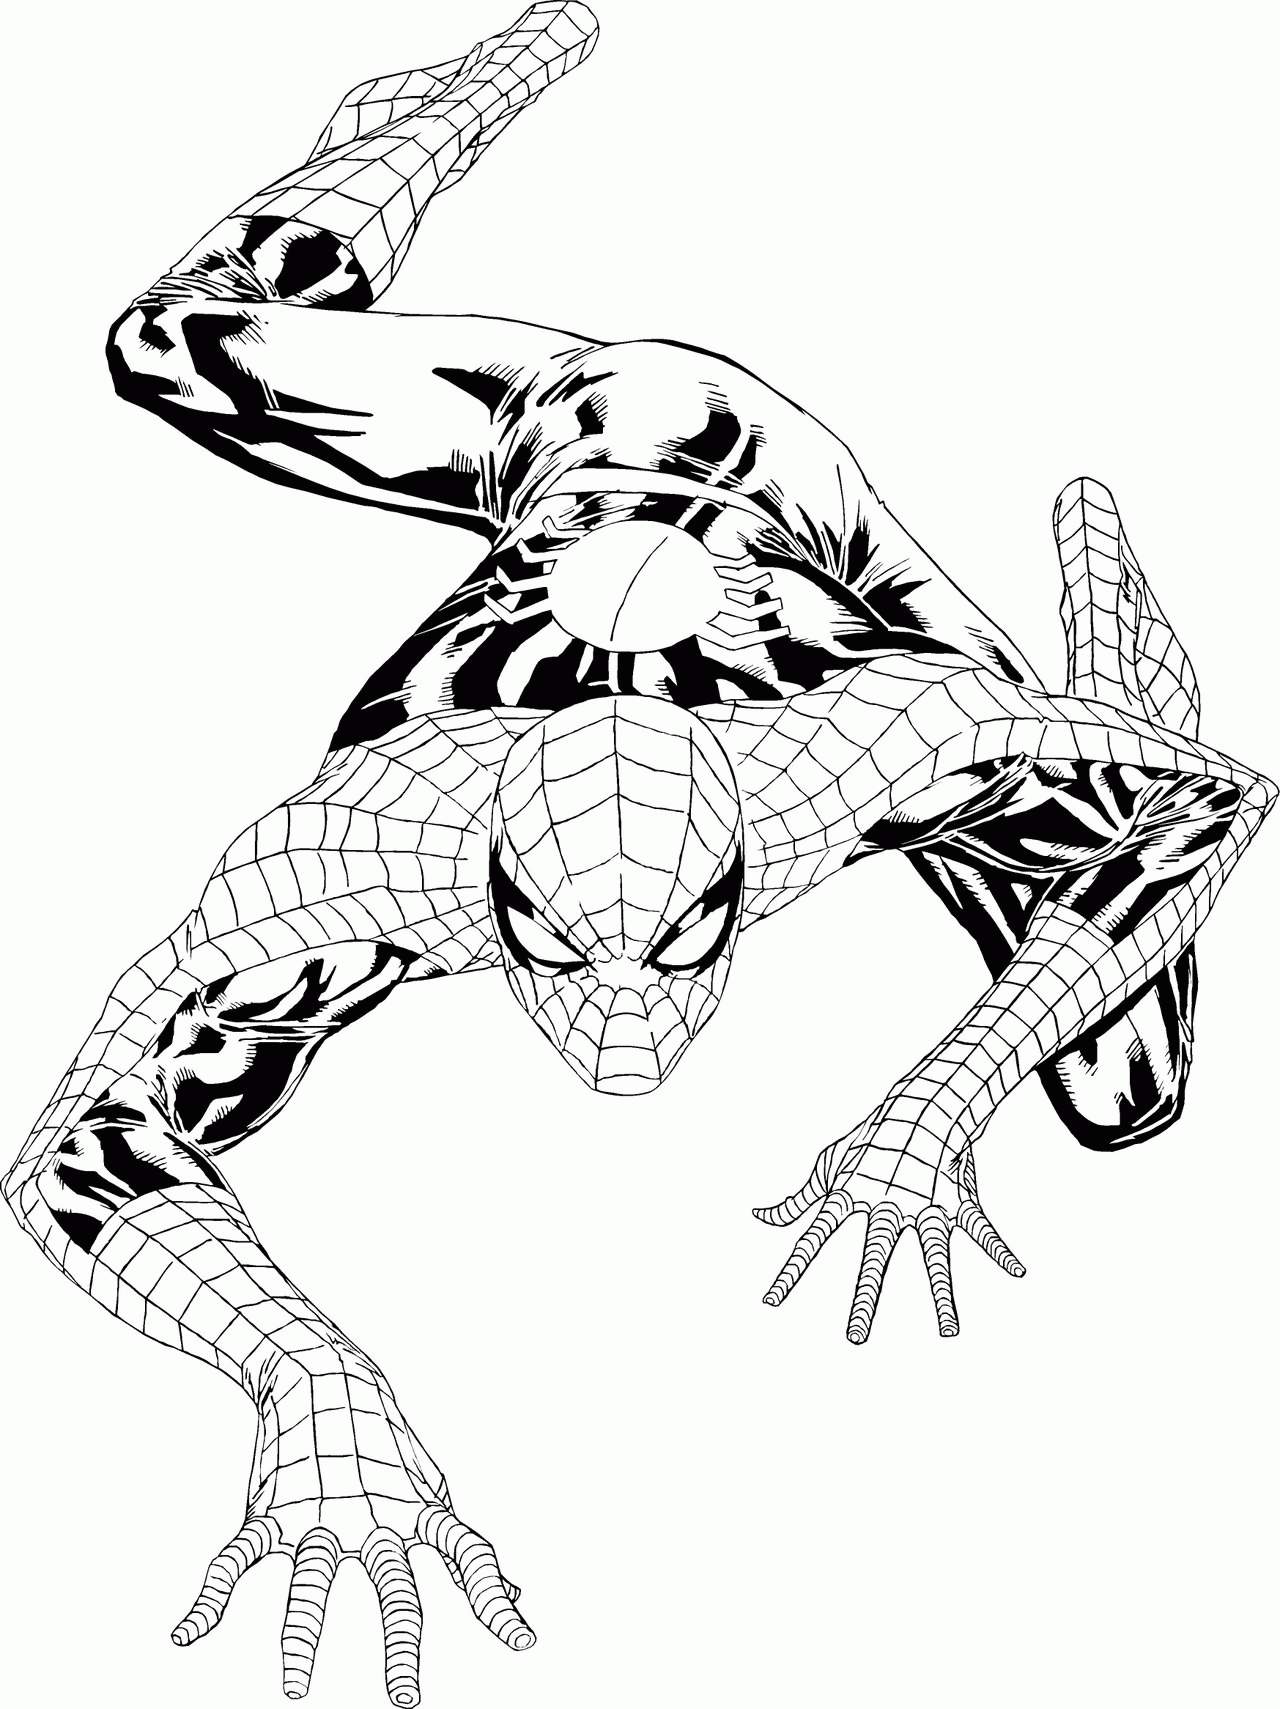 The Amazing Spider Man coloring page